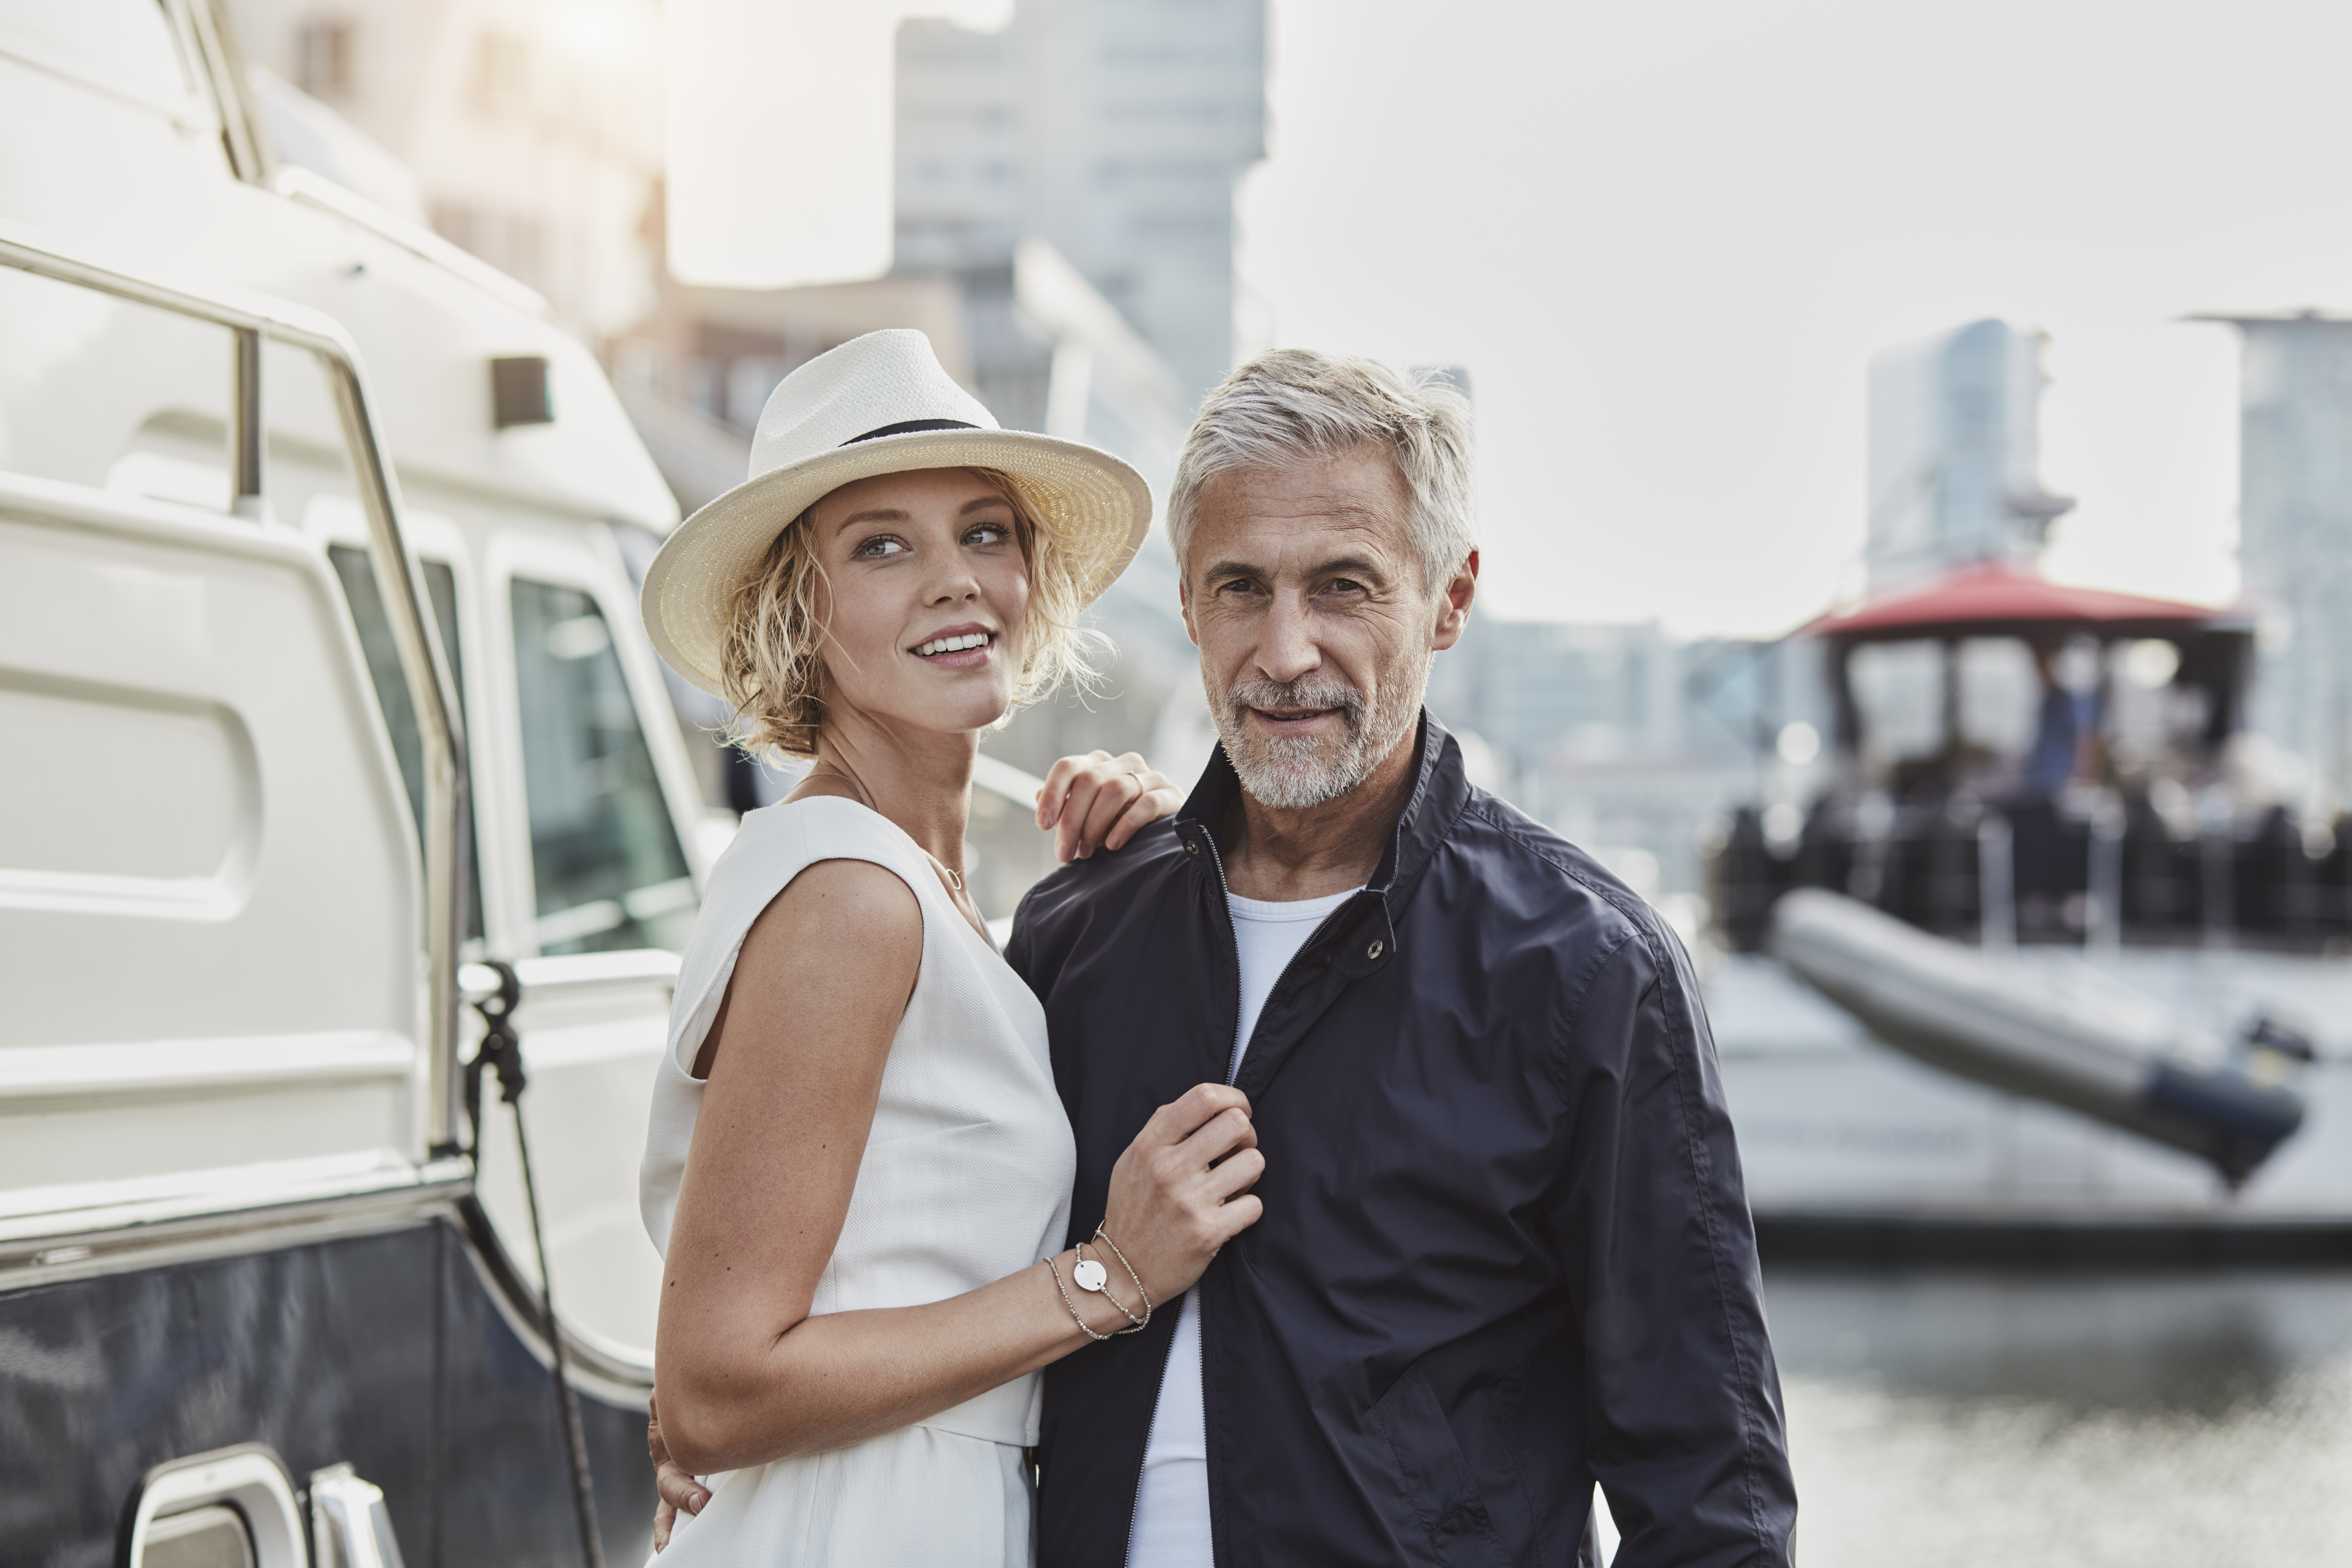 Older man and young woman at a marina next to a yacht | Source: Getty Images